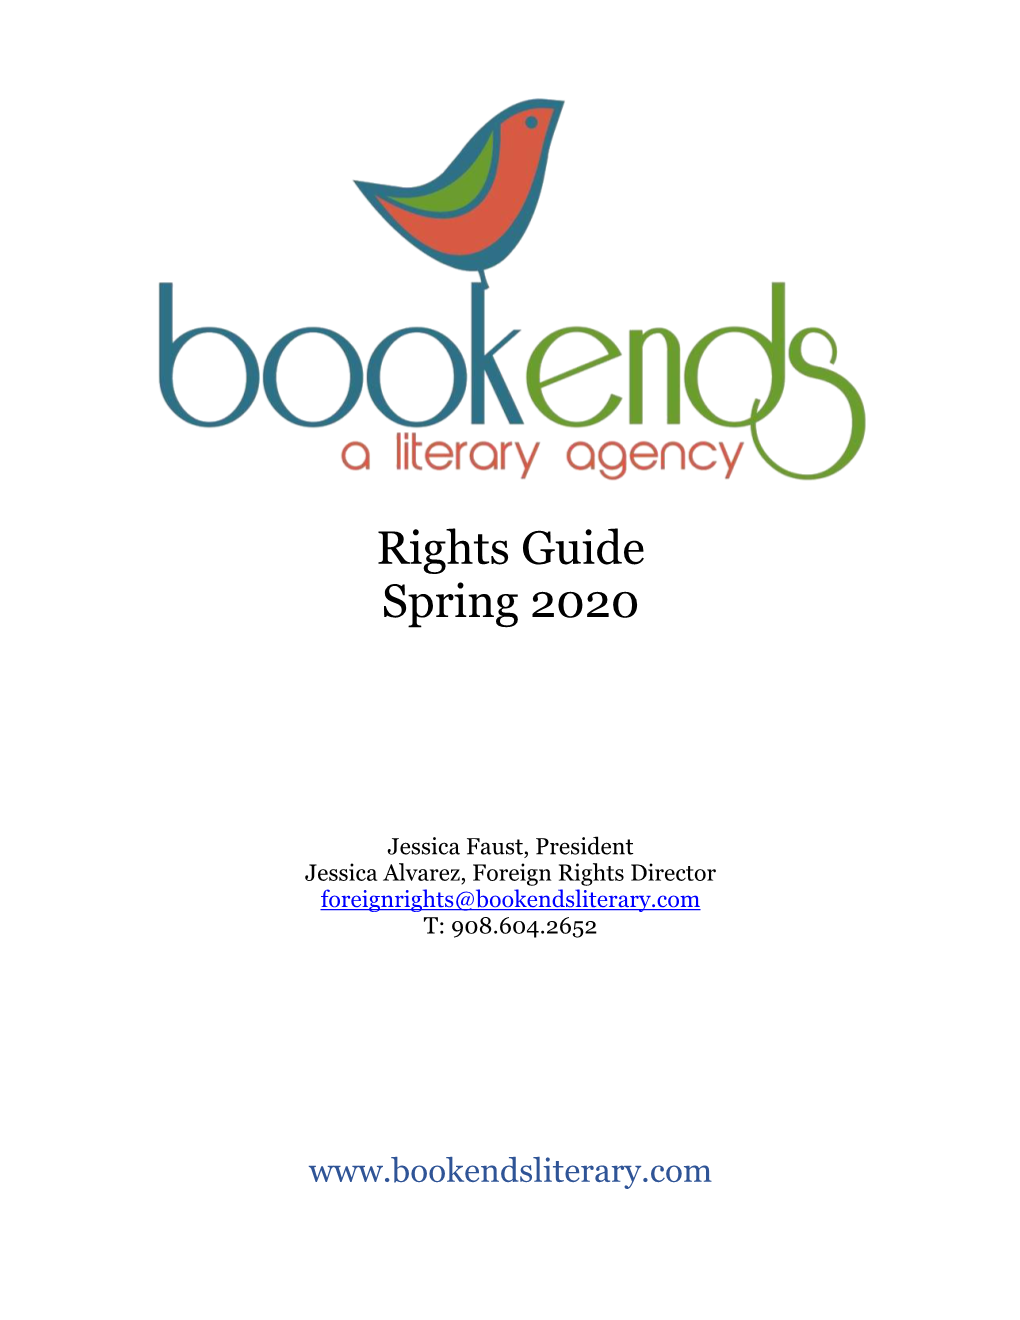 Rights Guide Spring 2020